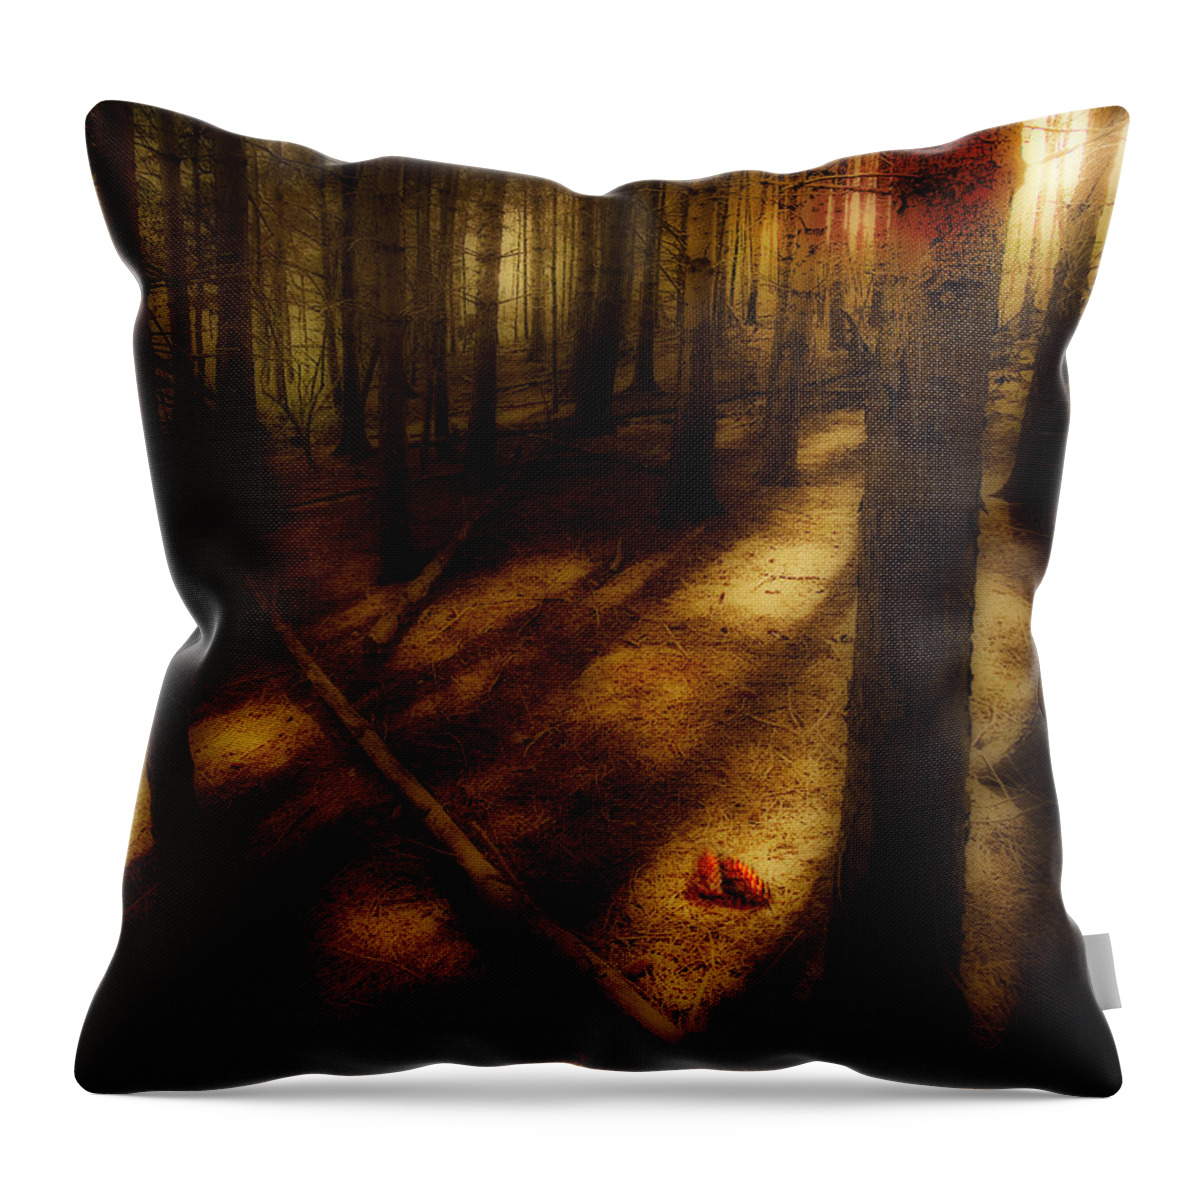 Woods Throw Pillow featuring the photograph Woods With Pine Cones by Meirion Matthias